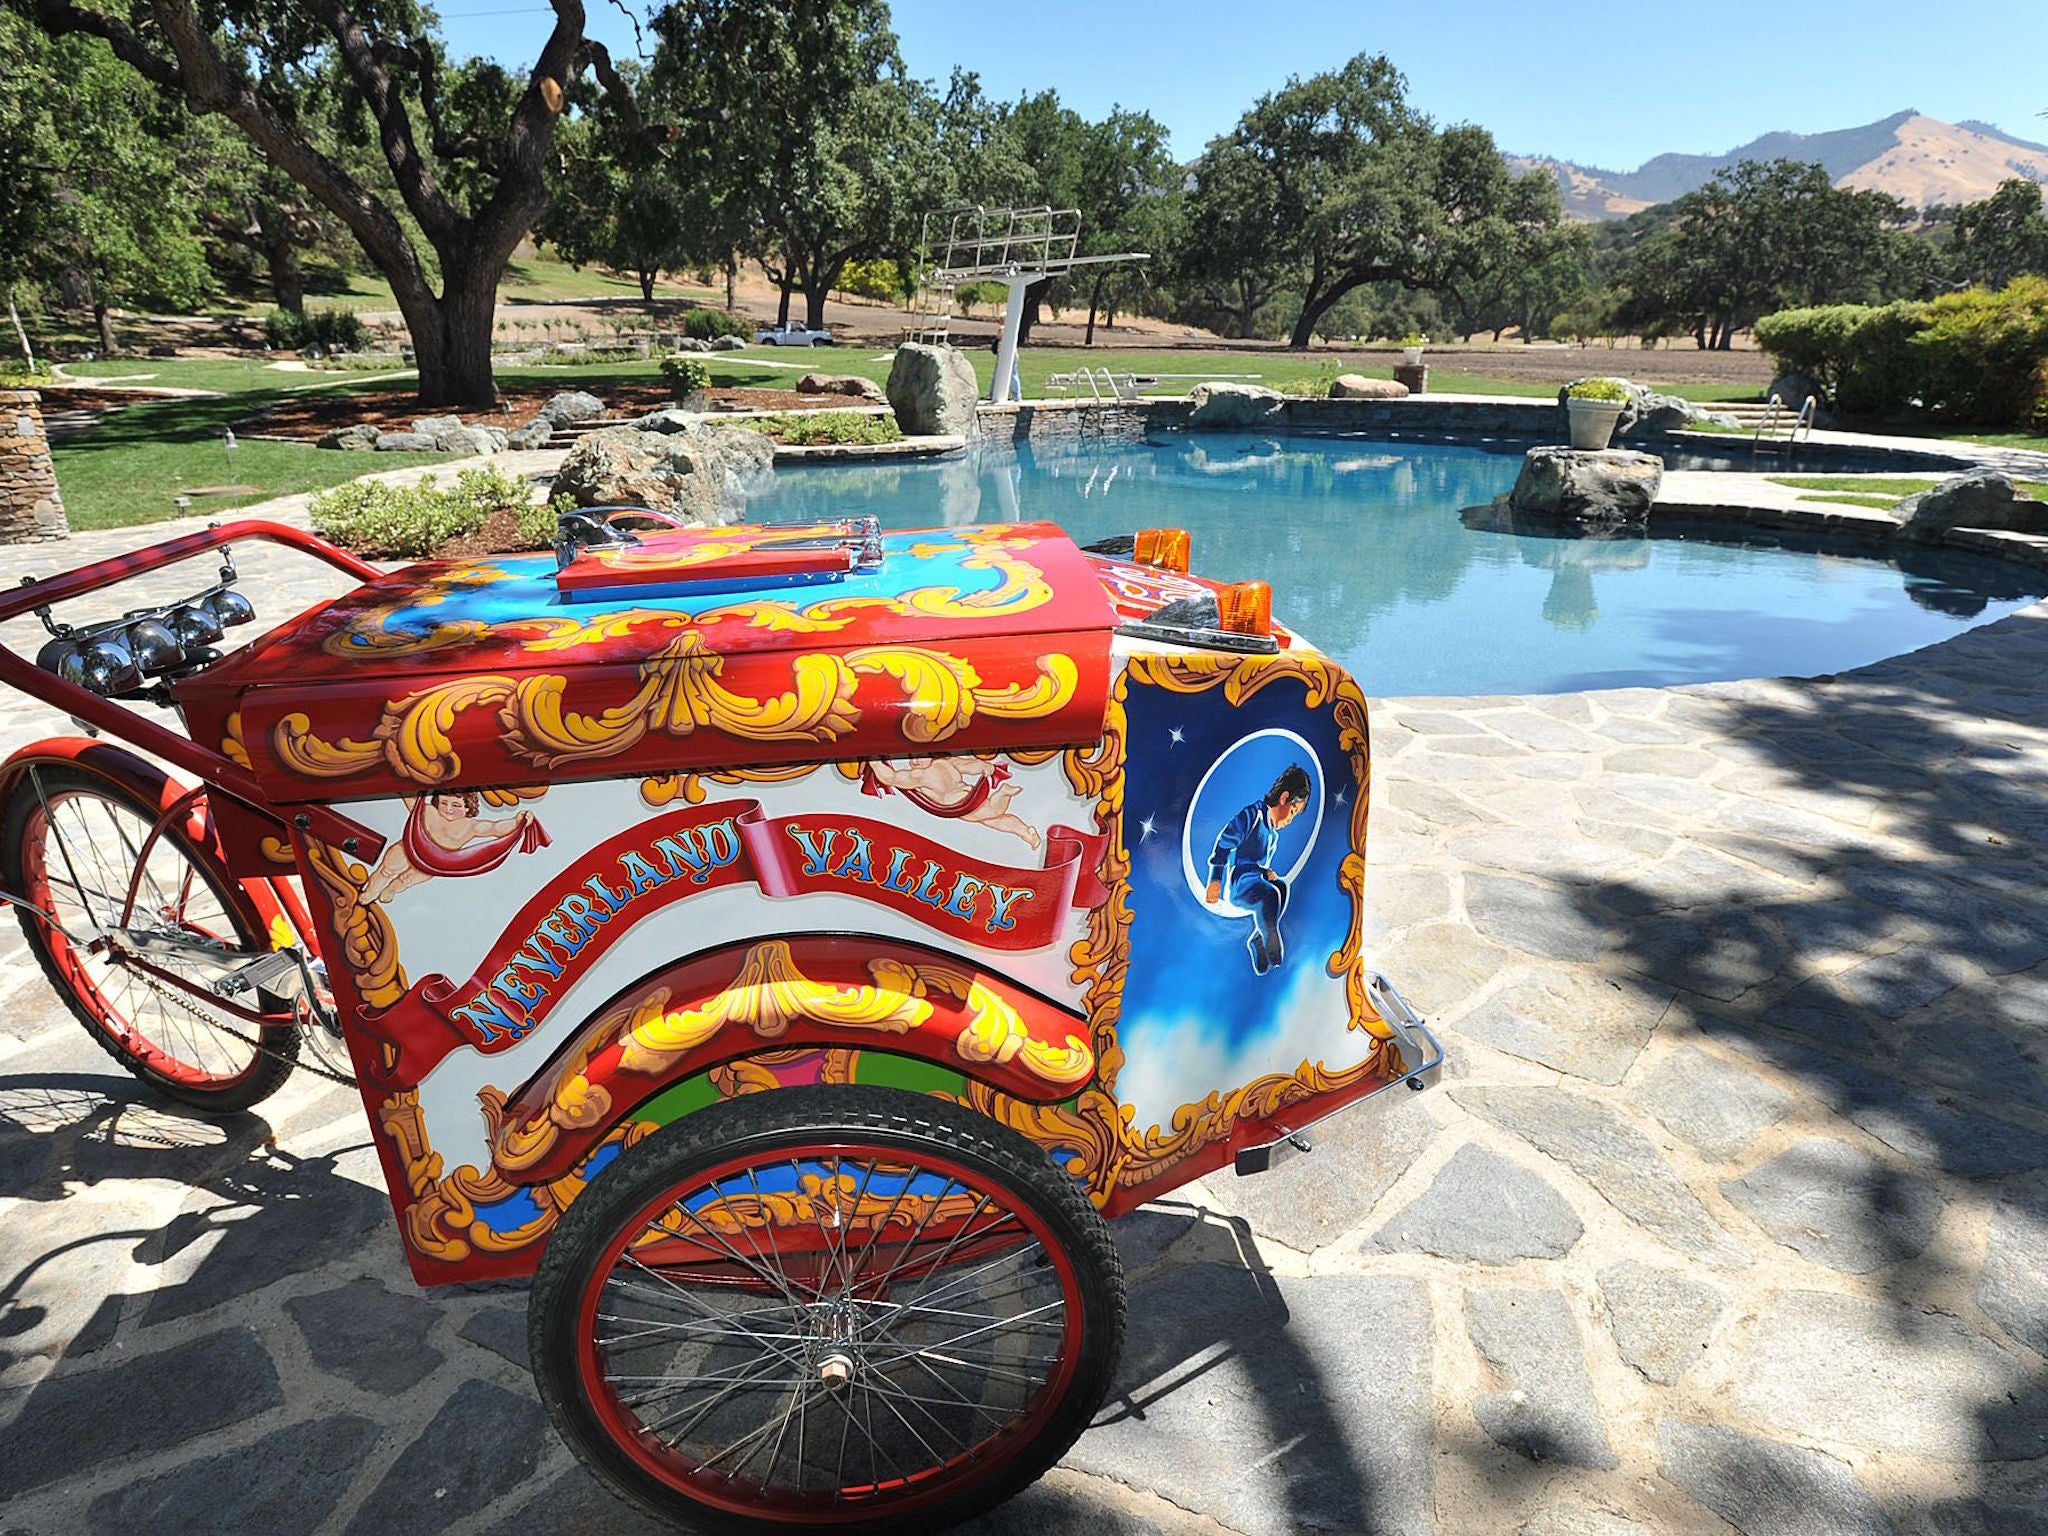 Pictured is a vintage ice-cream bike gifted to Jackson by Elizabeth Taylor; the singer hosted the actress’s seventh wedding at Neverland in 1991